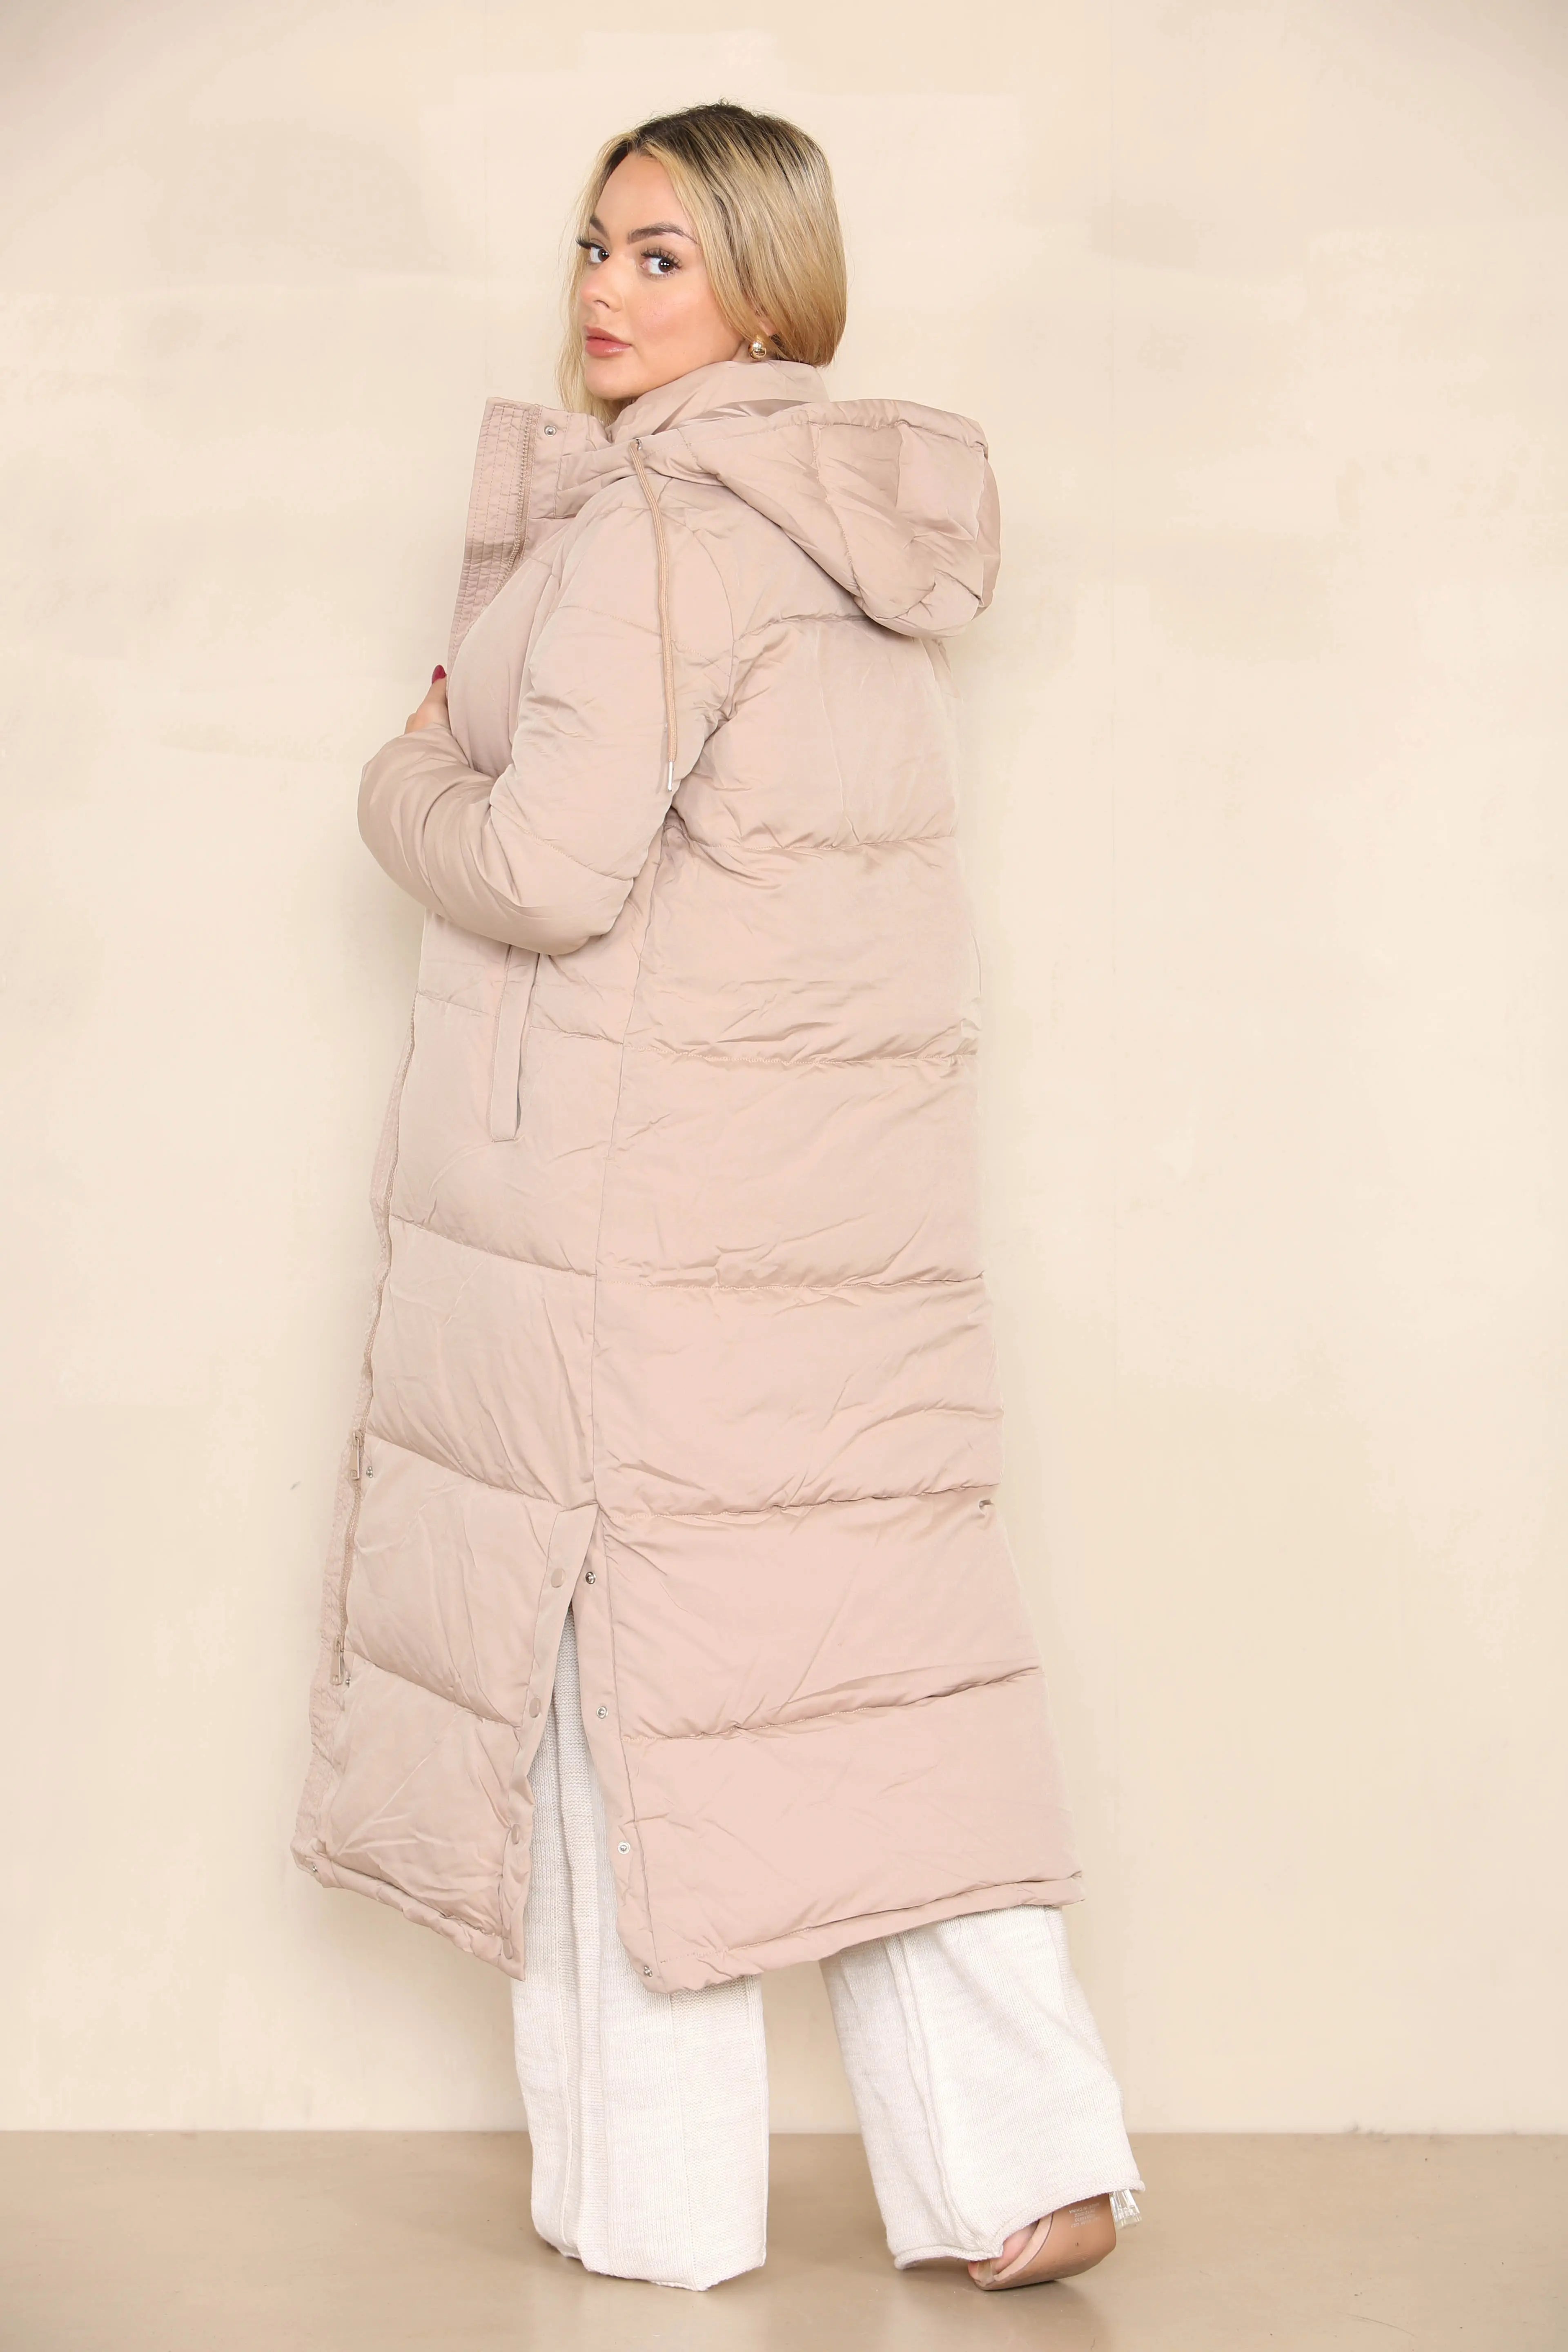 KATCH ME Taupe Winter Chic Side Slit Hooded Zip-Up Thermal Cotton Coat Coat